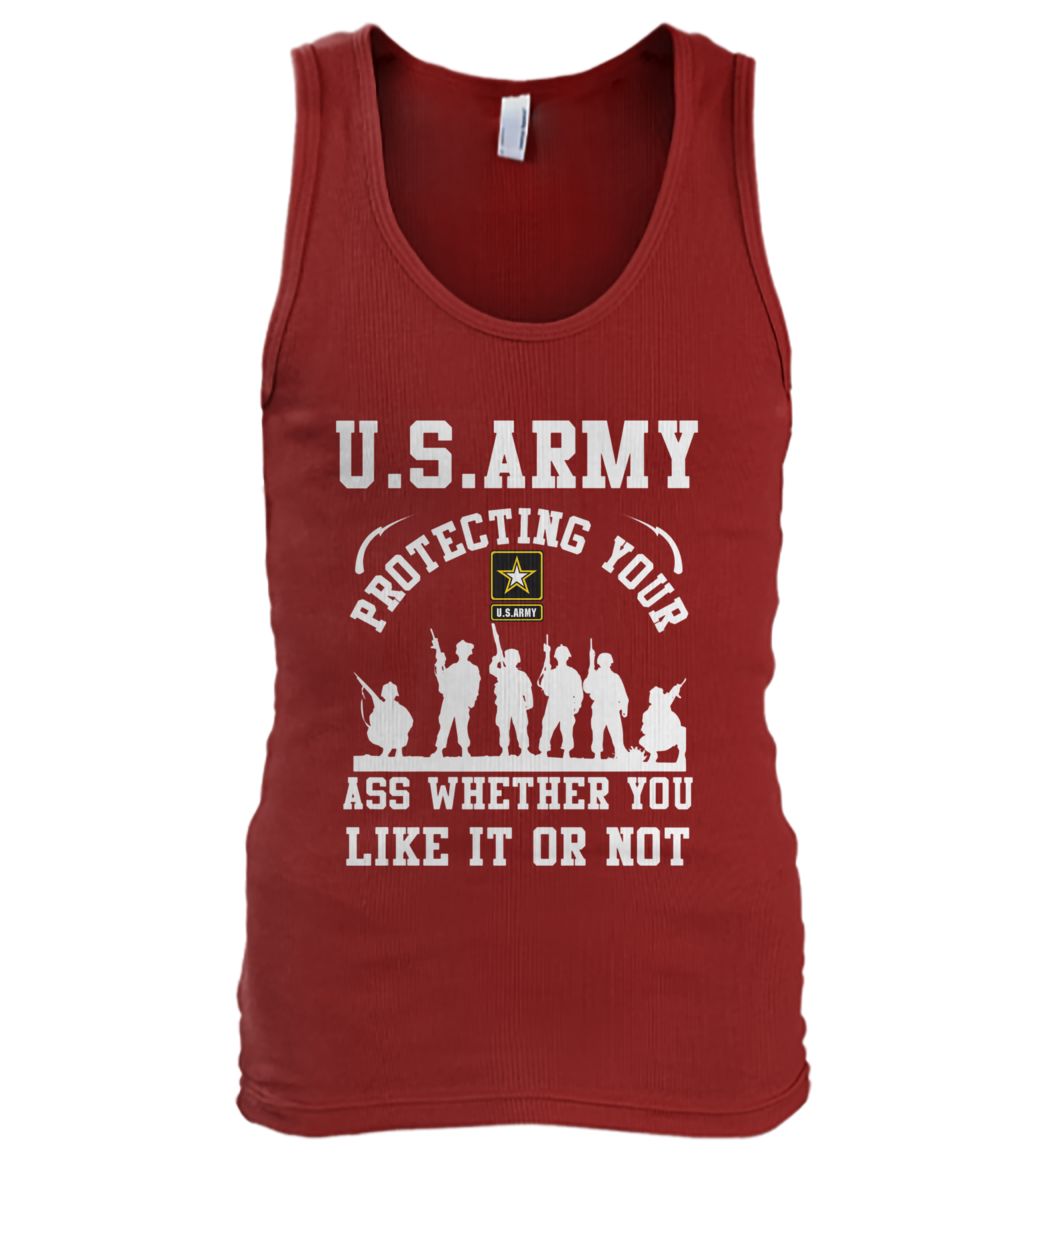 U.S.Army protecting your ass whether you like it or not men's tank top